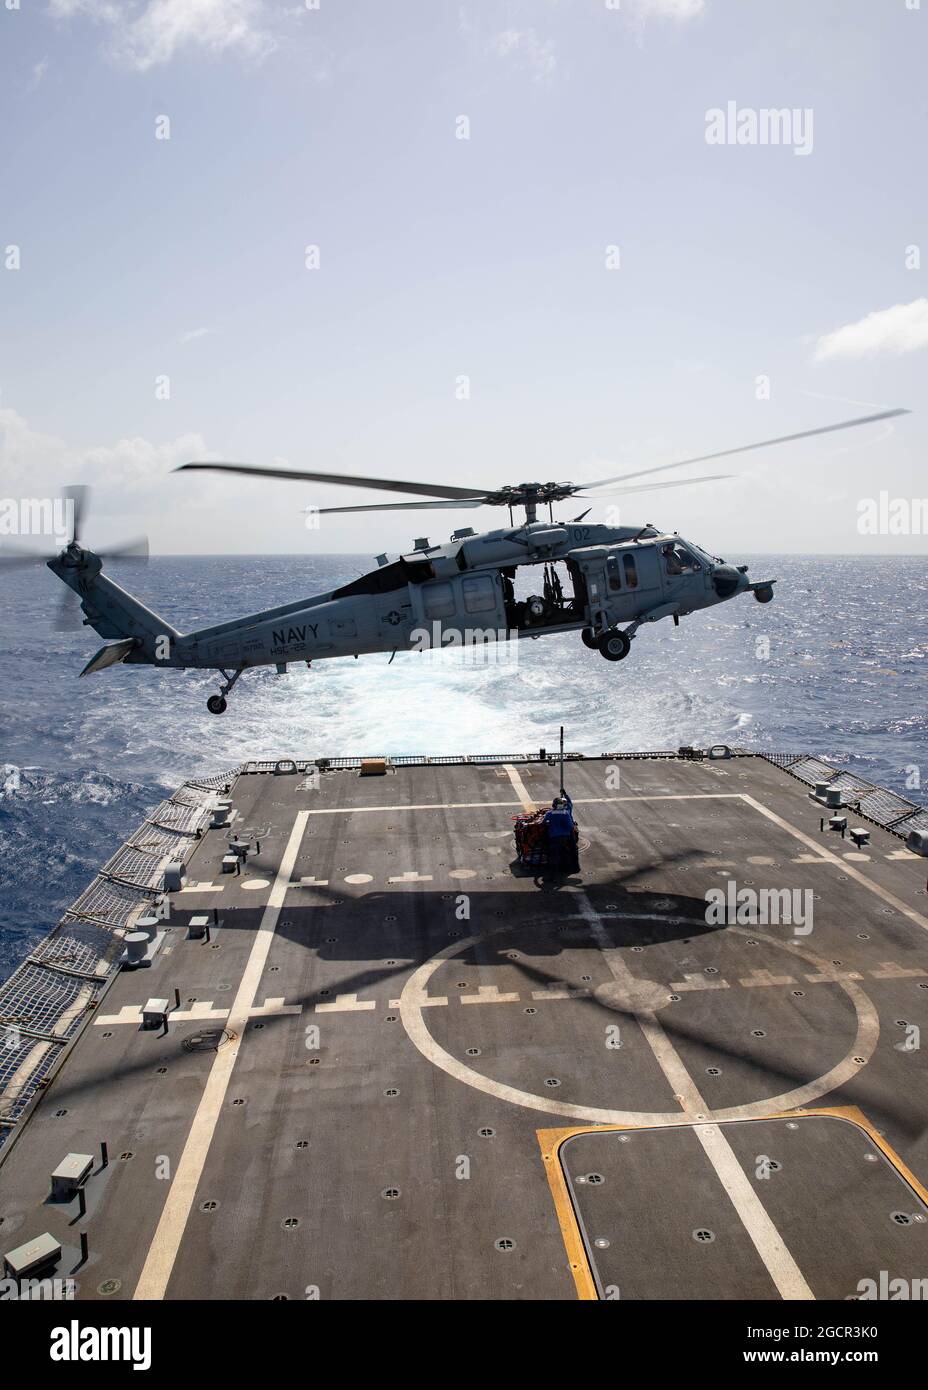 210721-N-RL695-1241   CARIBBEAN SEA - (July 21, 2021) -- An MH-60S Seahawk helicopter attached to the “Sea Knights” of Helicopter Sea Combat Squadron (HSC) 22, Detachment 3, takes off from the flight deck of the Freedom-variant littoral combat ship USS Sioux City (LCS 11) to transfer of 575 kilograms of suspected contraband to the Freedom-variant littoral combat ship USS Billings (LCS 15), July 21, 2021. Sioux City is deployed to the U.S. 4th Fleet area of operations to support Joint Interagency Task Force South’s mission, which includes counter-illicit drug trafficking missions in the Caribbe Stock Photo